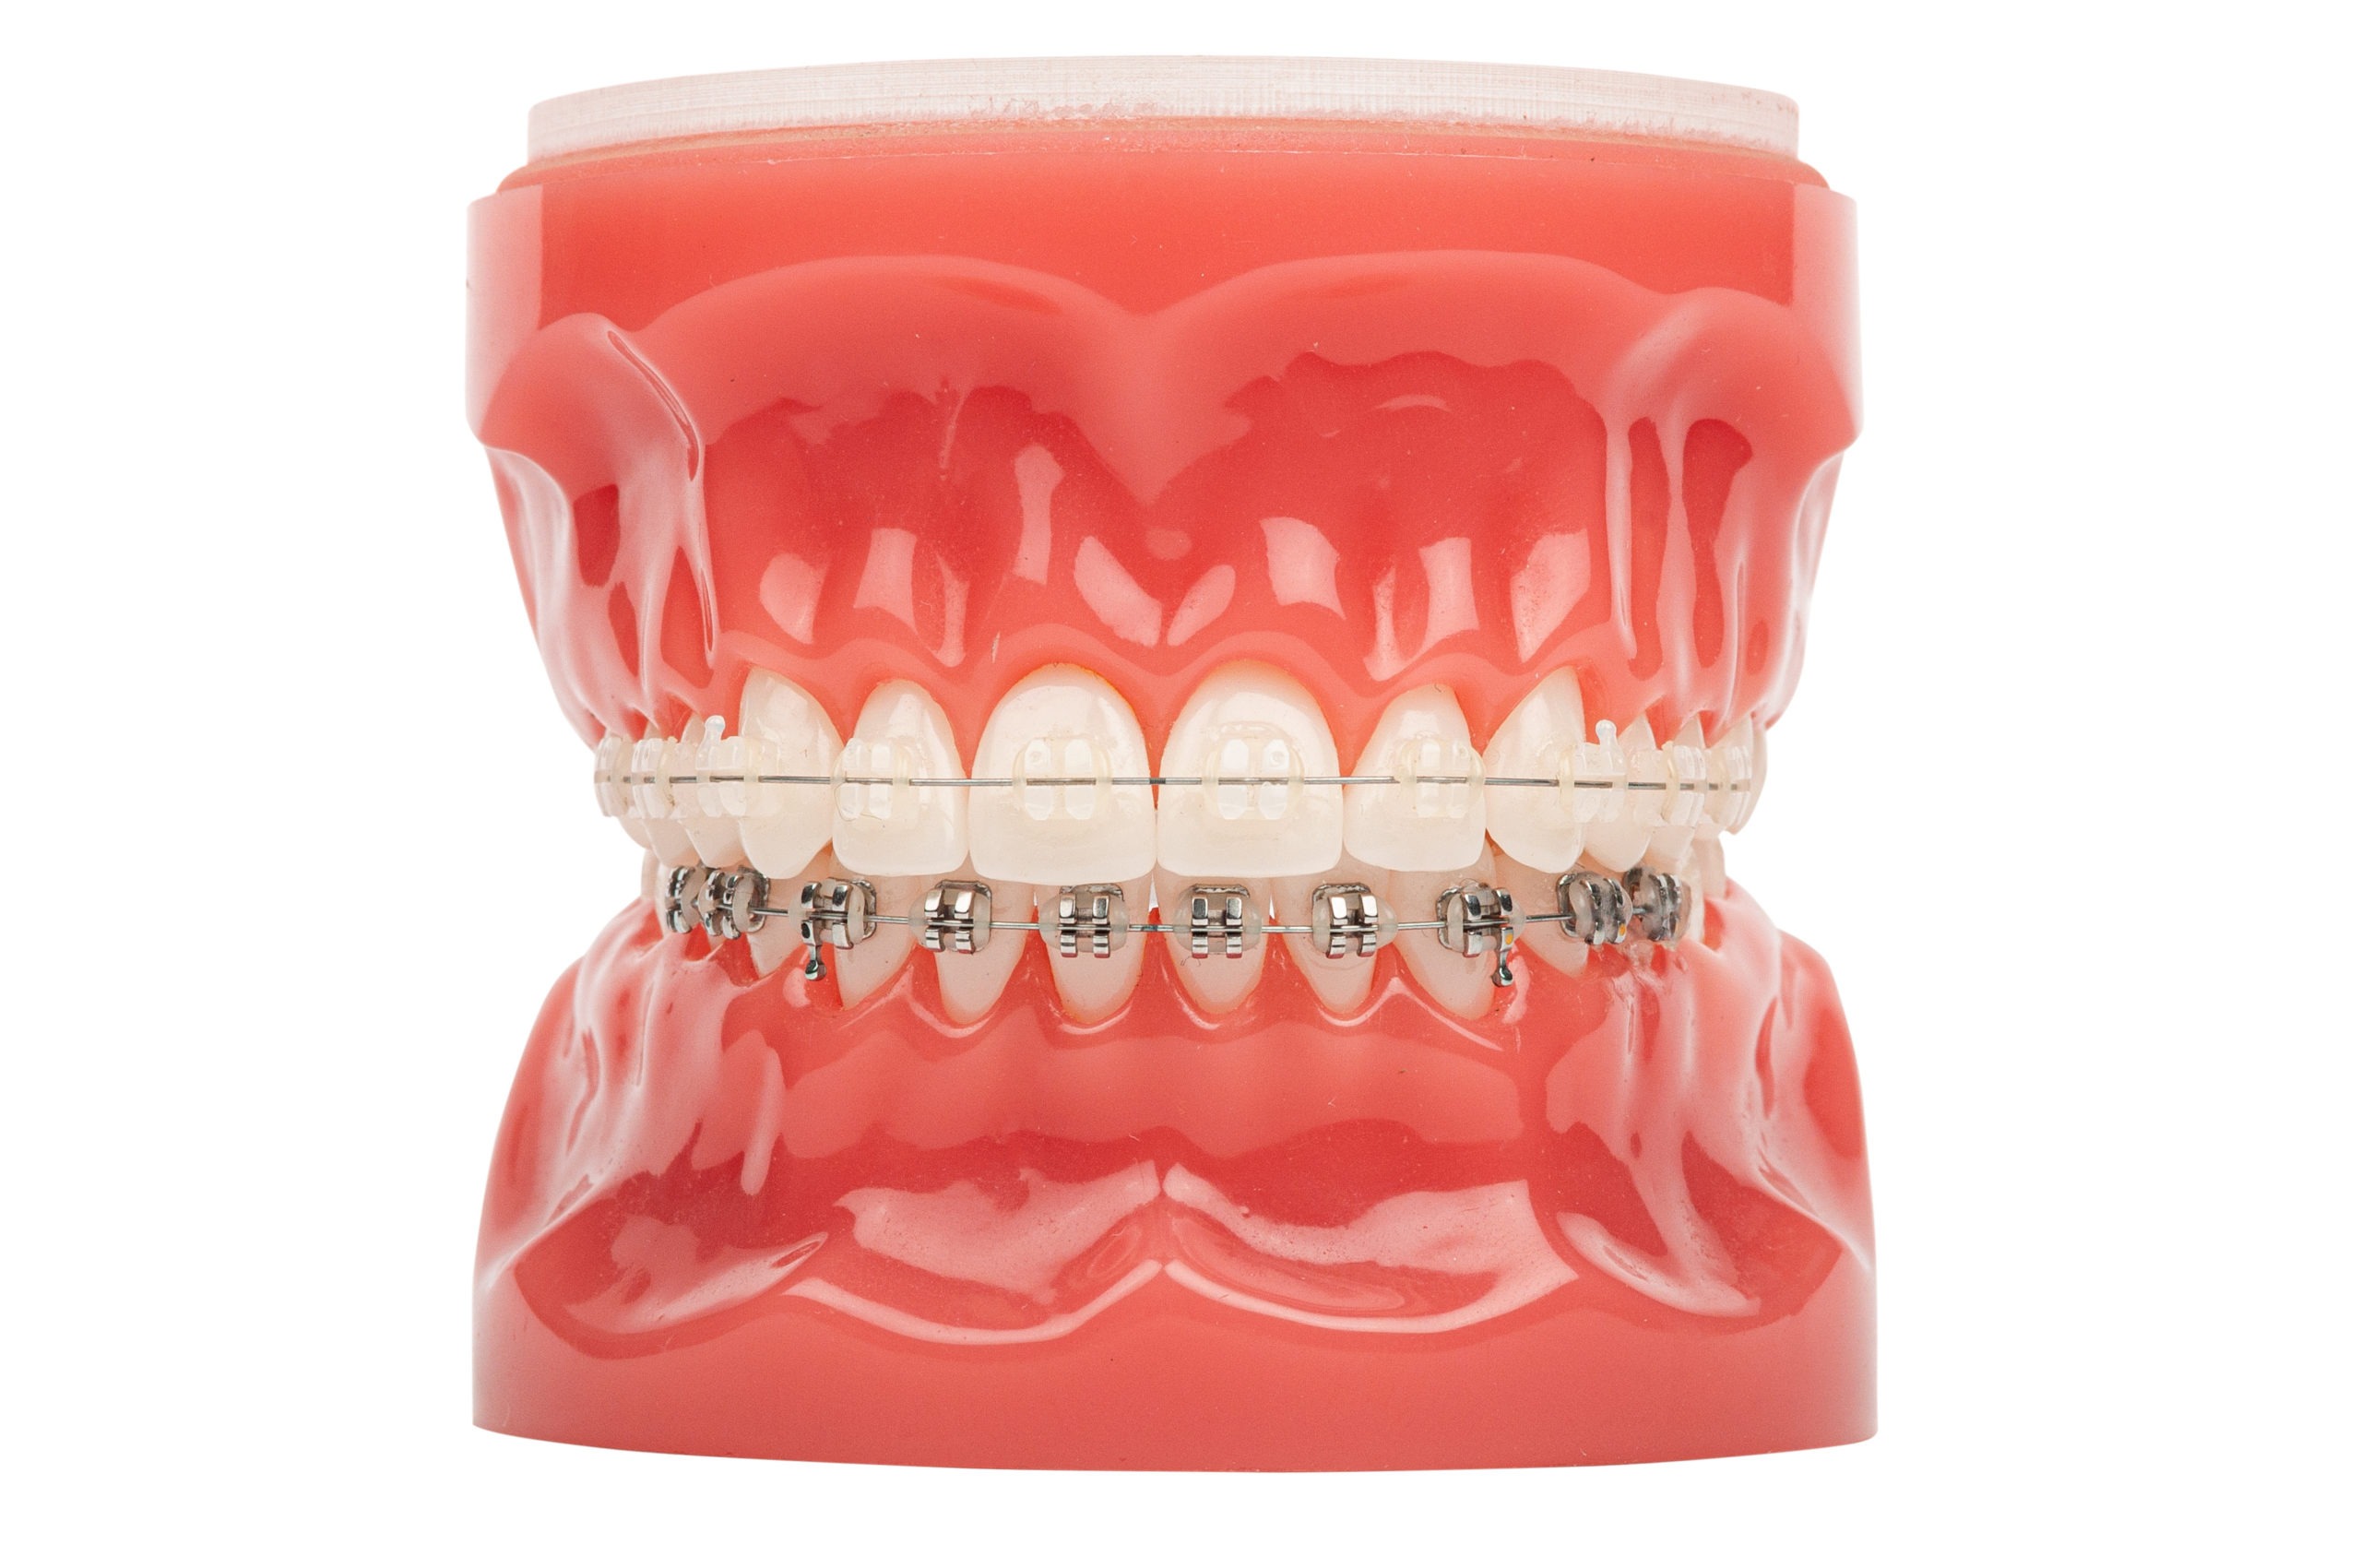 Difference Between Metal Braces and Clear, Ceramic Braces